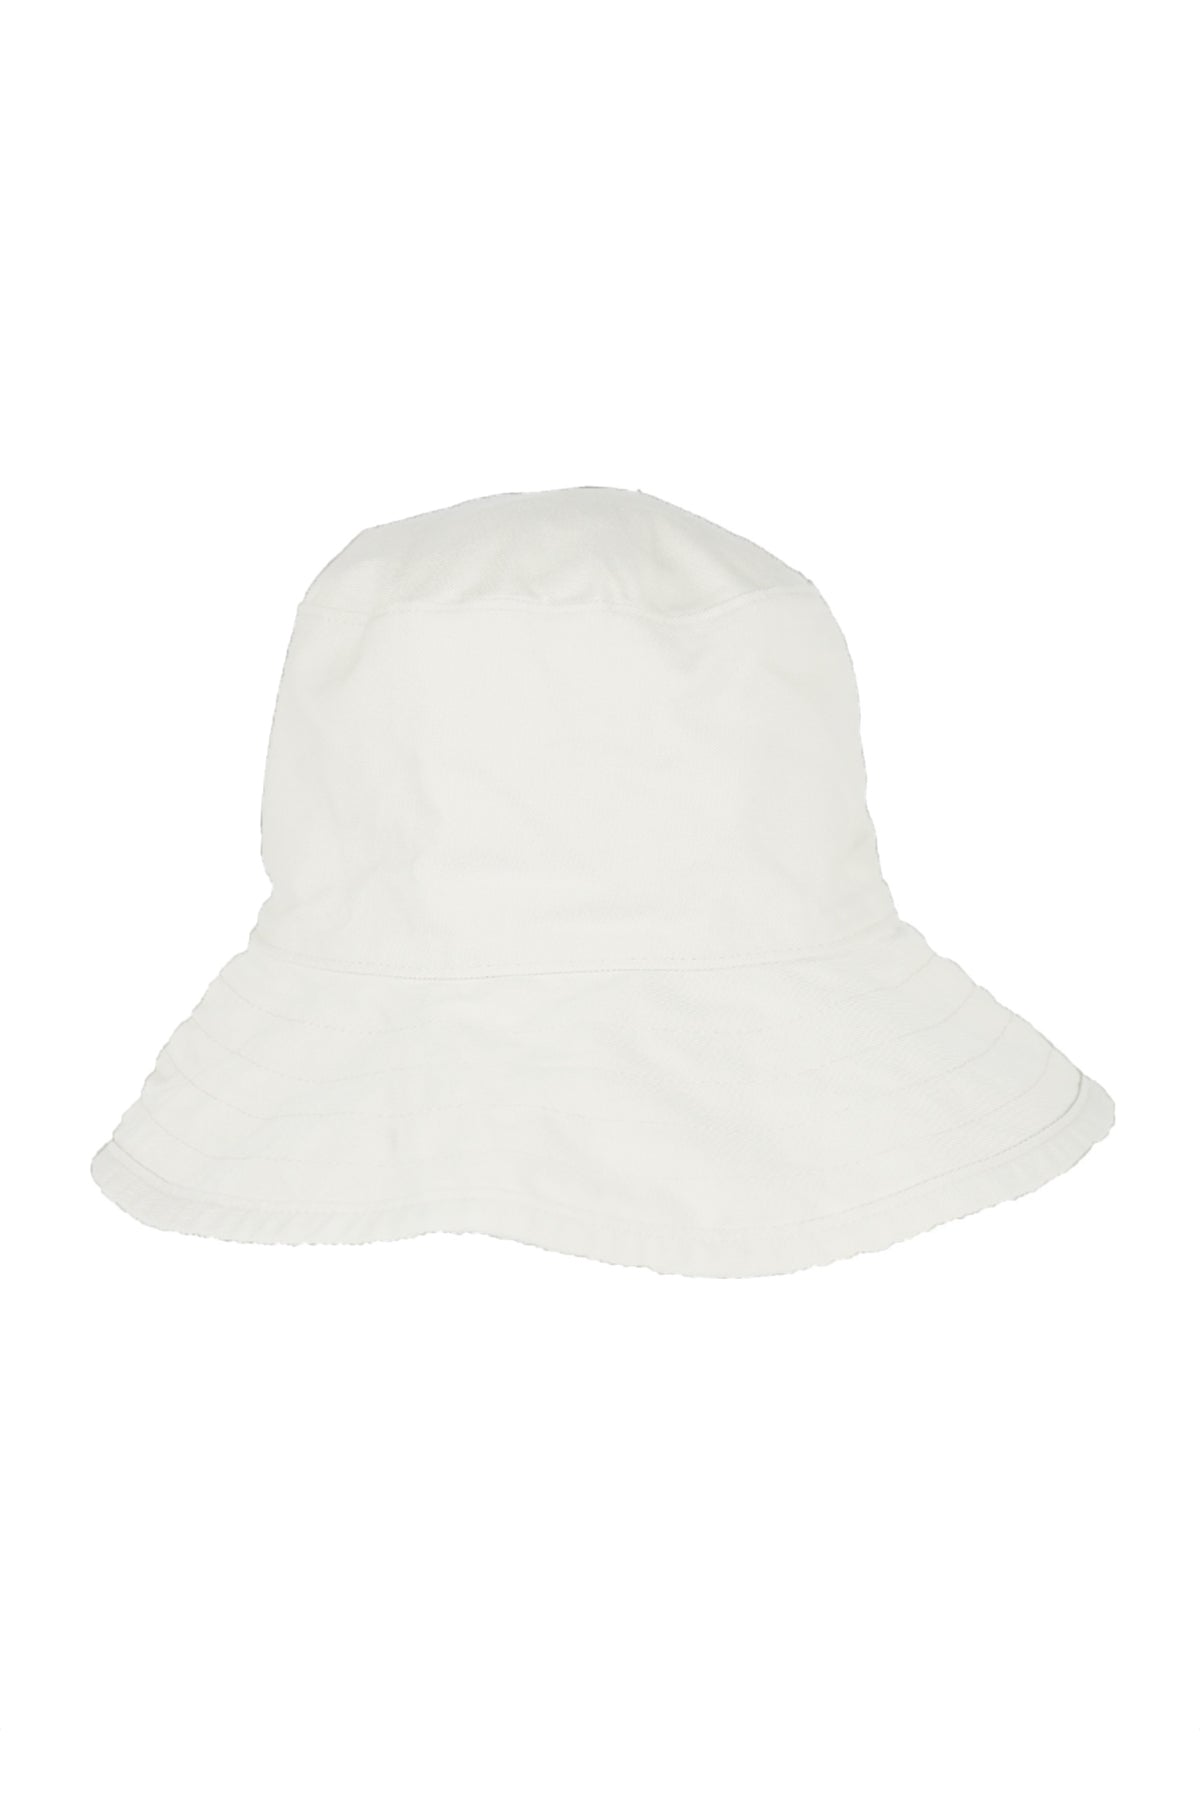   A Velvet by Graham & Spencer Washed Cotton Crusher Hat on a white background. 